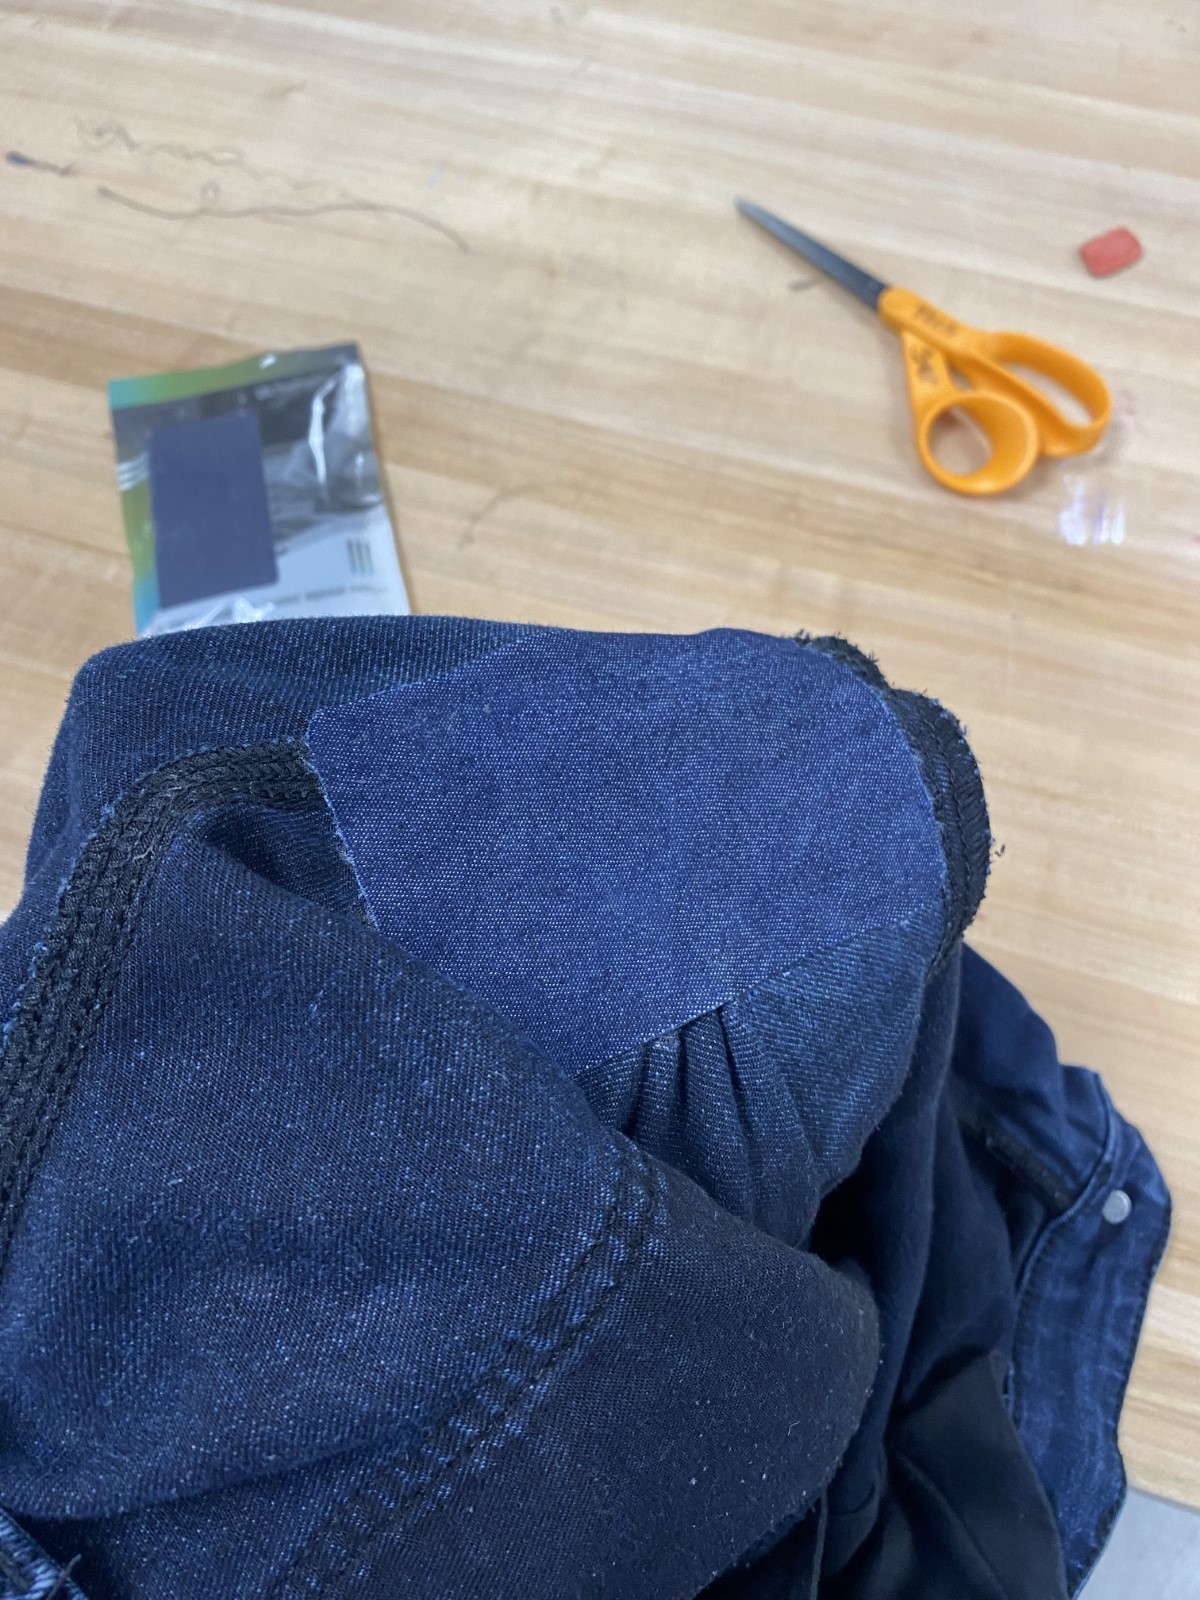 Interior of jeans with patch that has been ironed on.